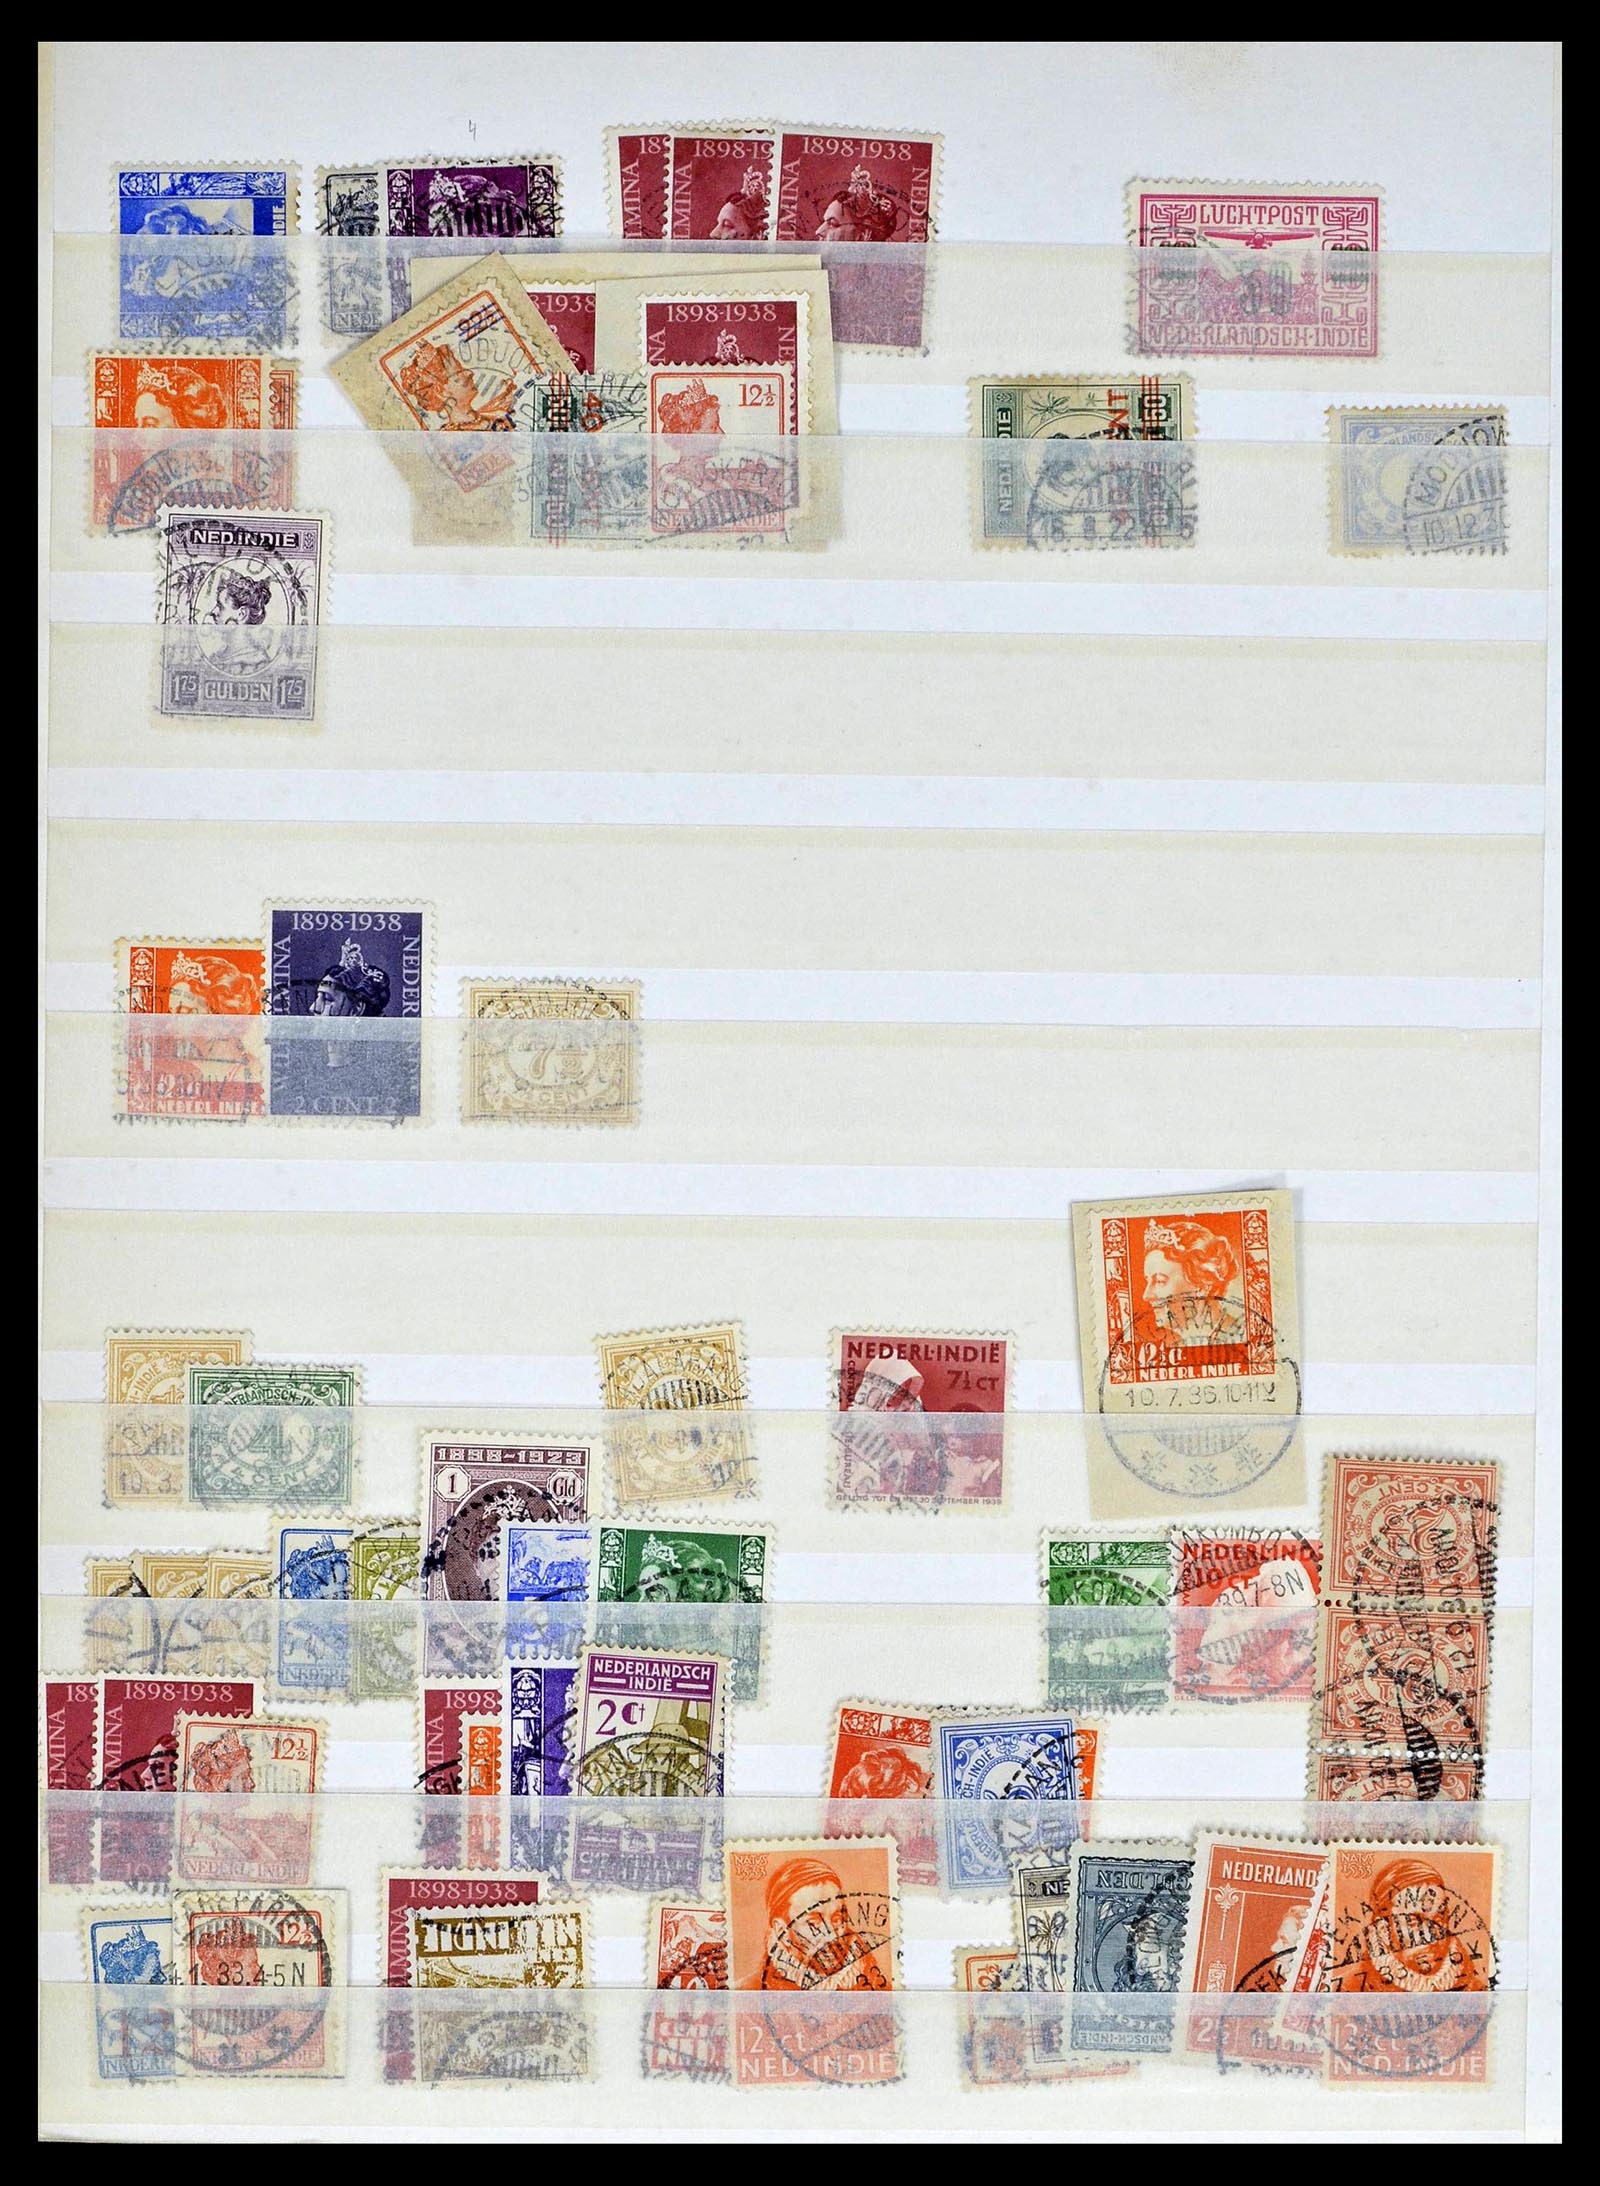 38783 0093 - Stamp collection 38783 Dutch east Indies cancels 1870-1948.